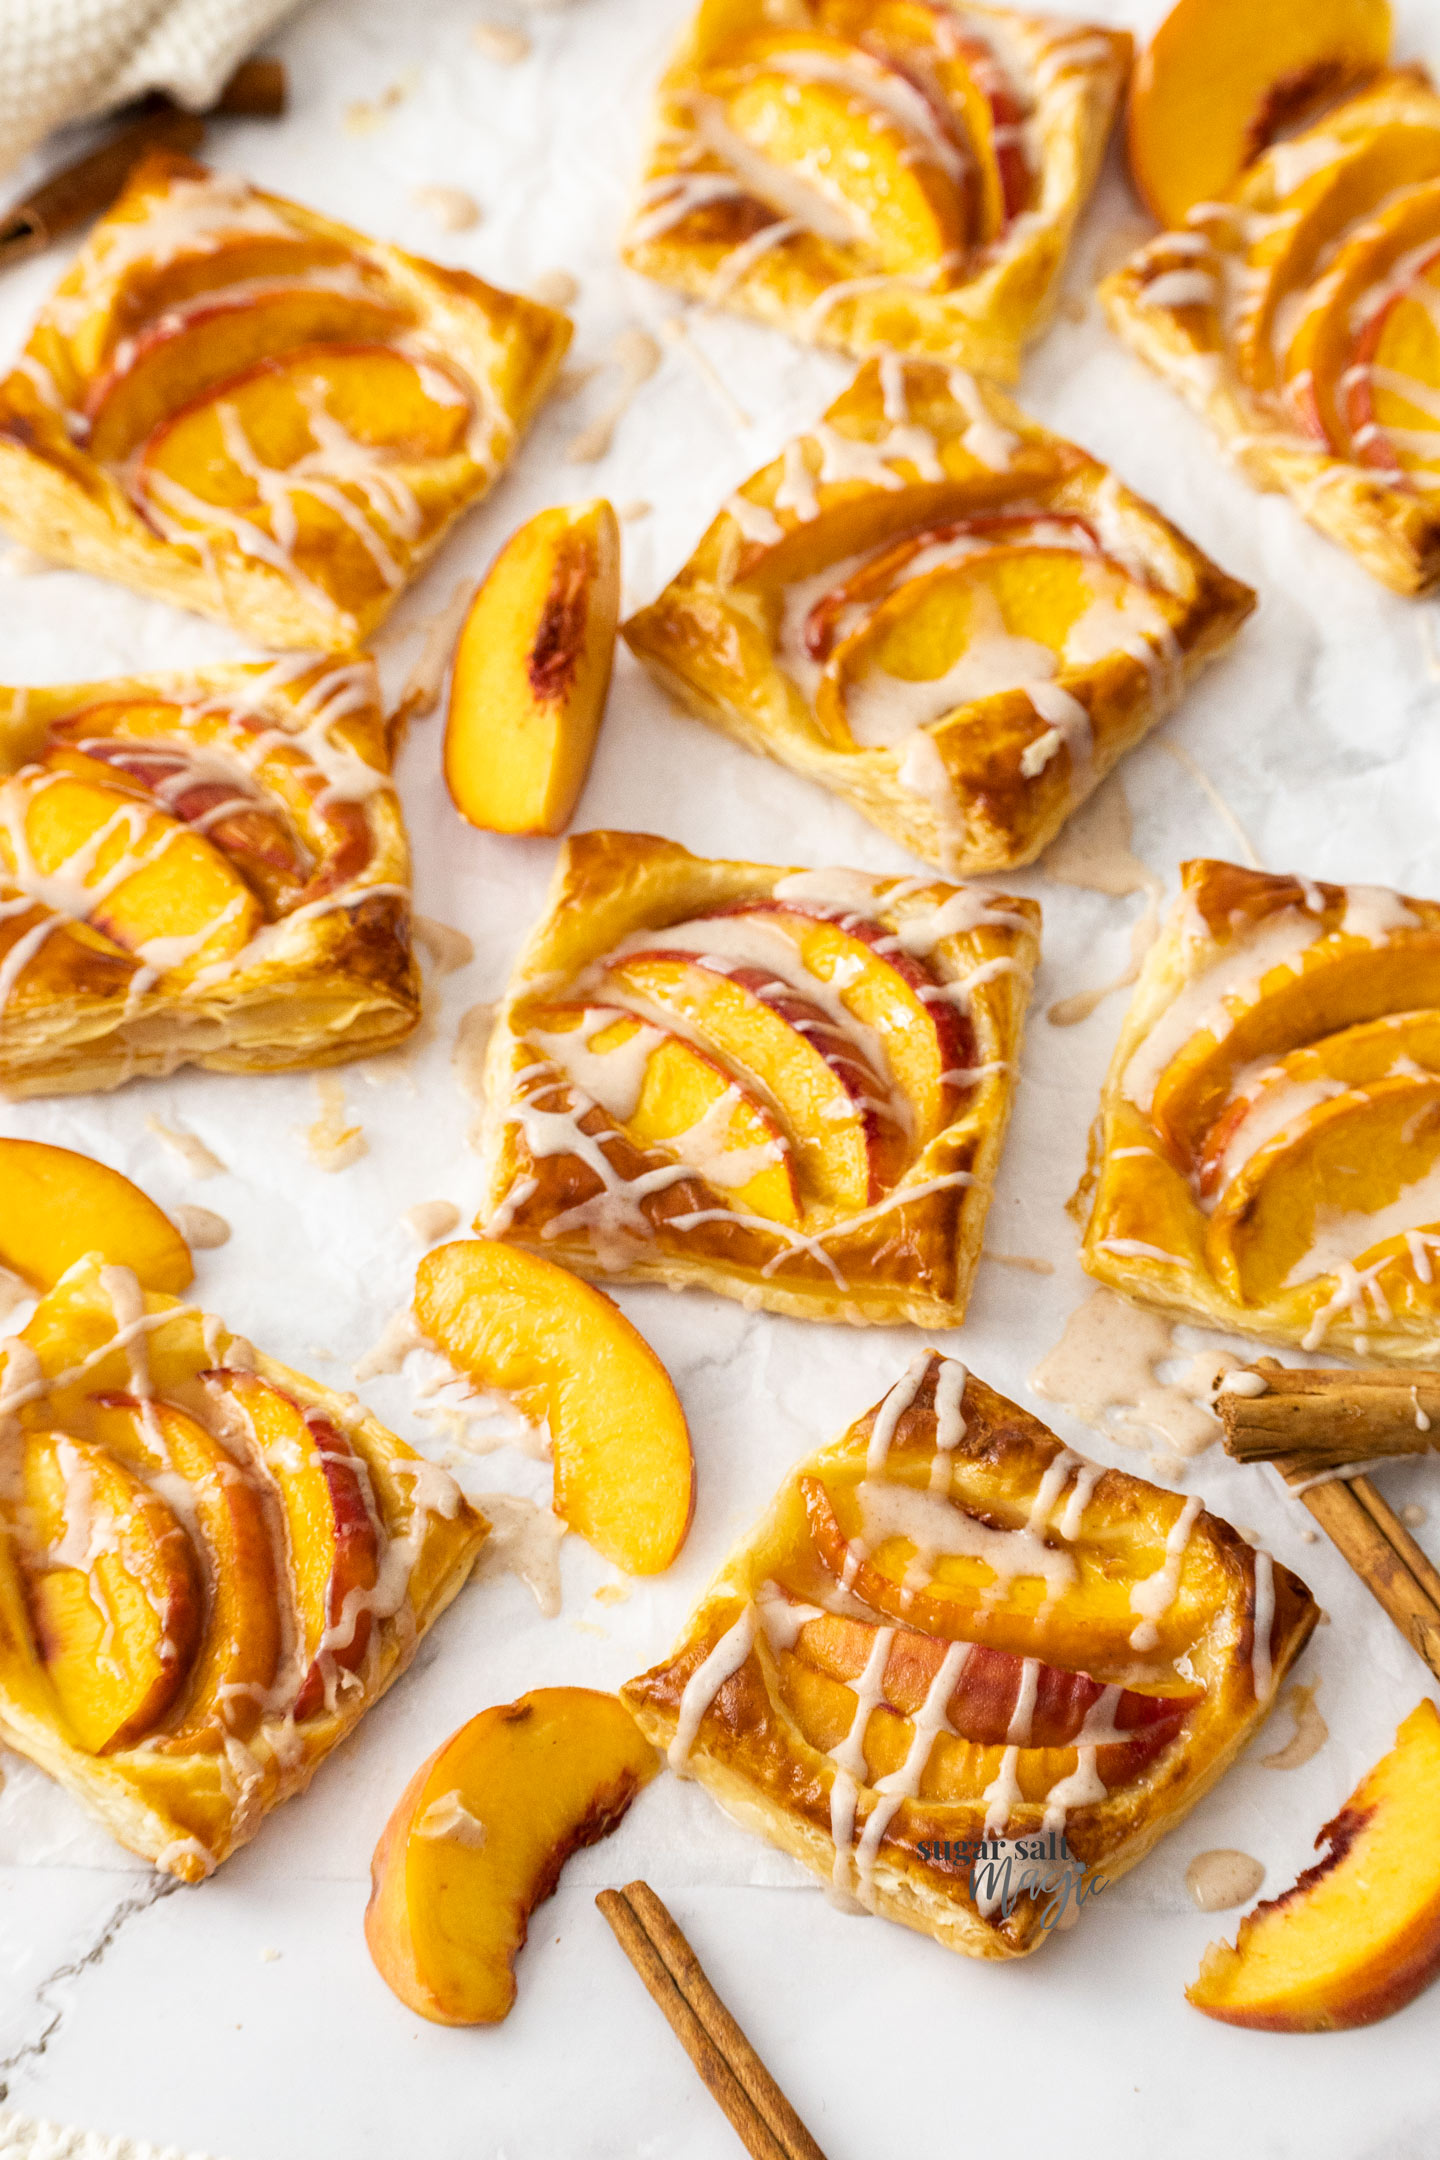 Mini peach tarts drizzled with icing.